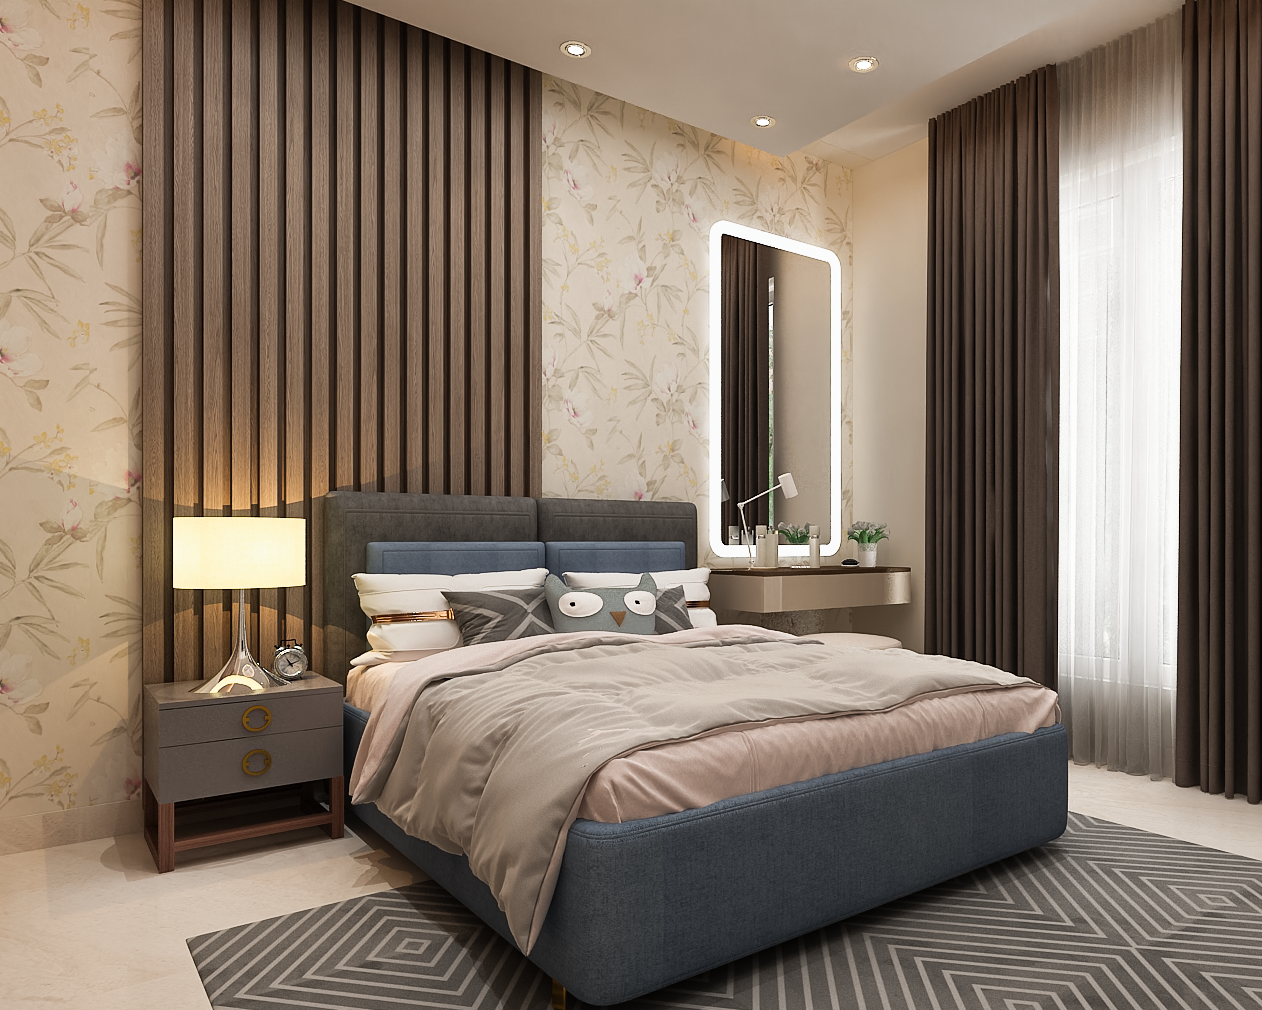 Spacious Master Bedroom Design With Fluted Panels